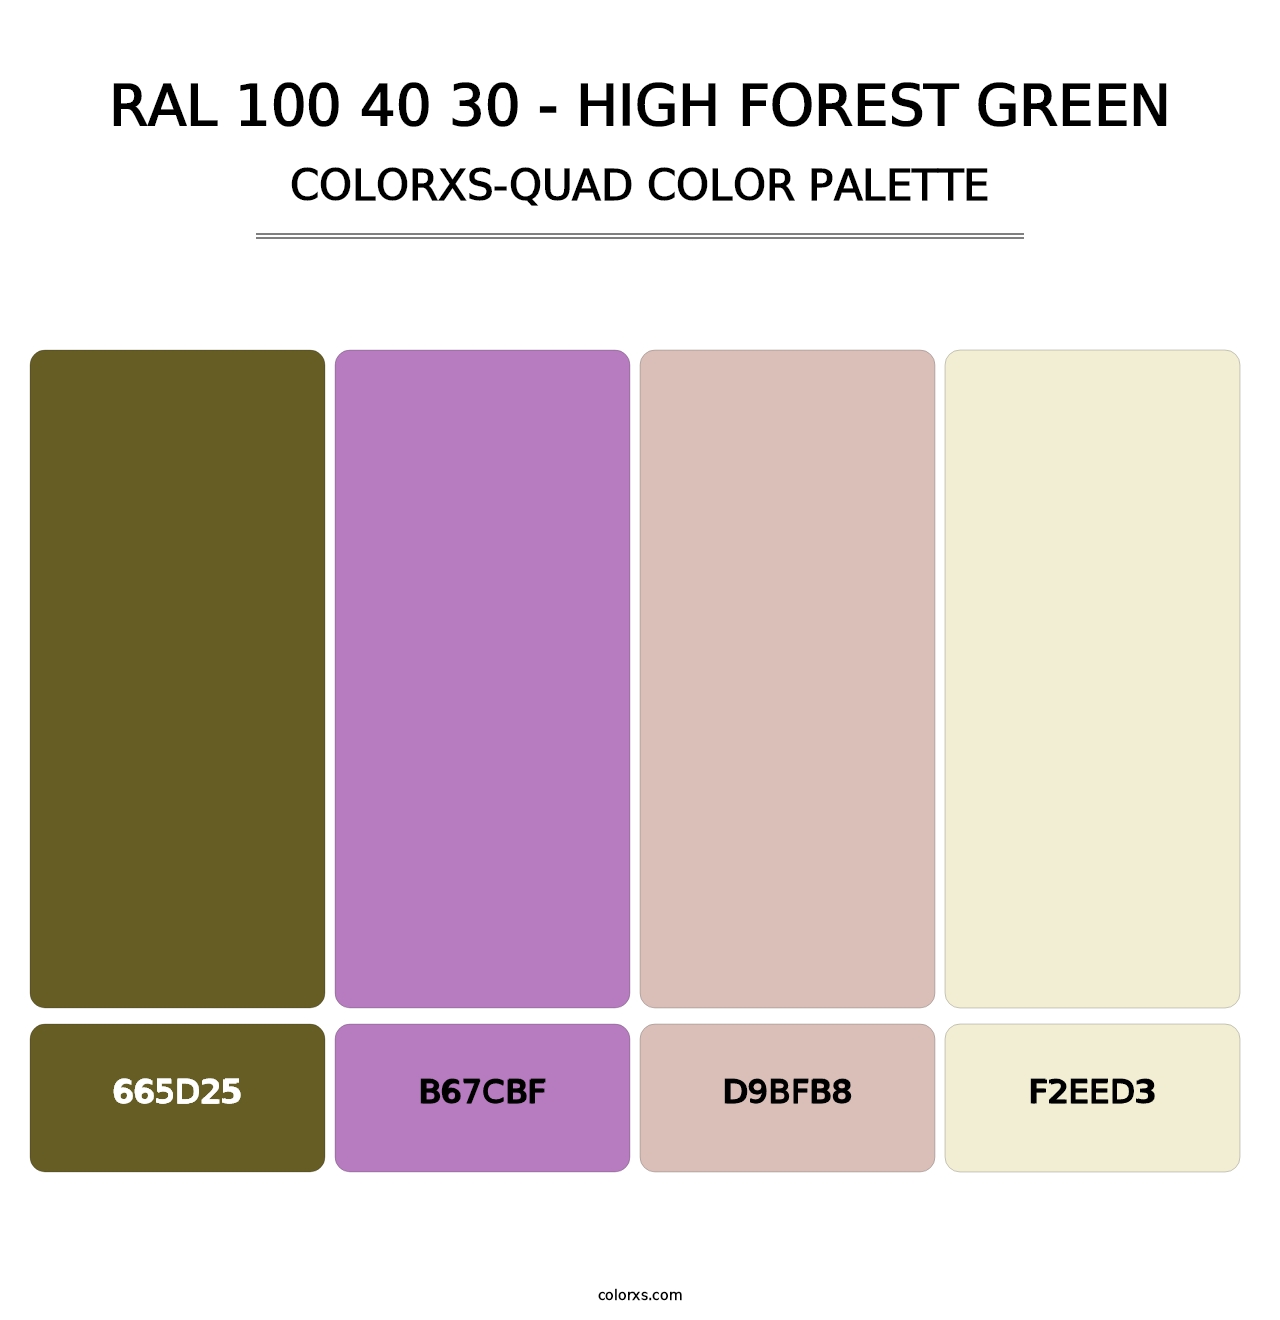 RAL 100 40 30 - High Forest Green - Colorxs Quad Palette